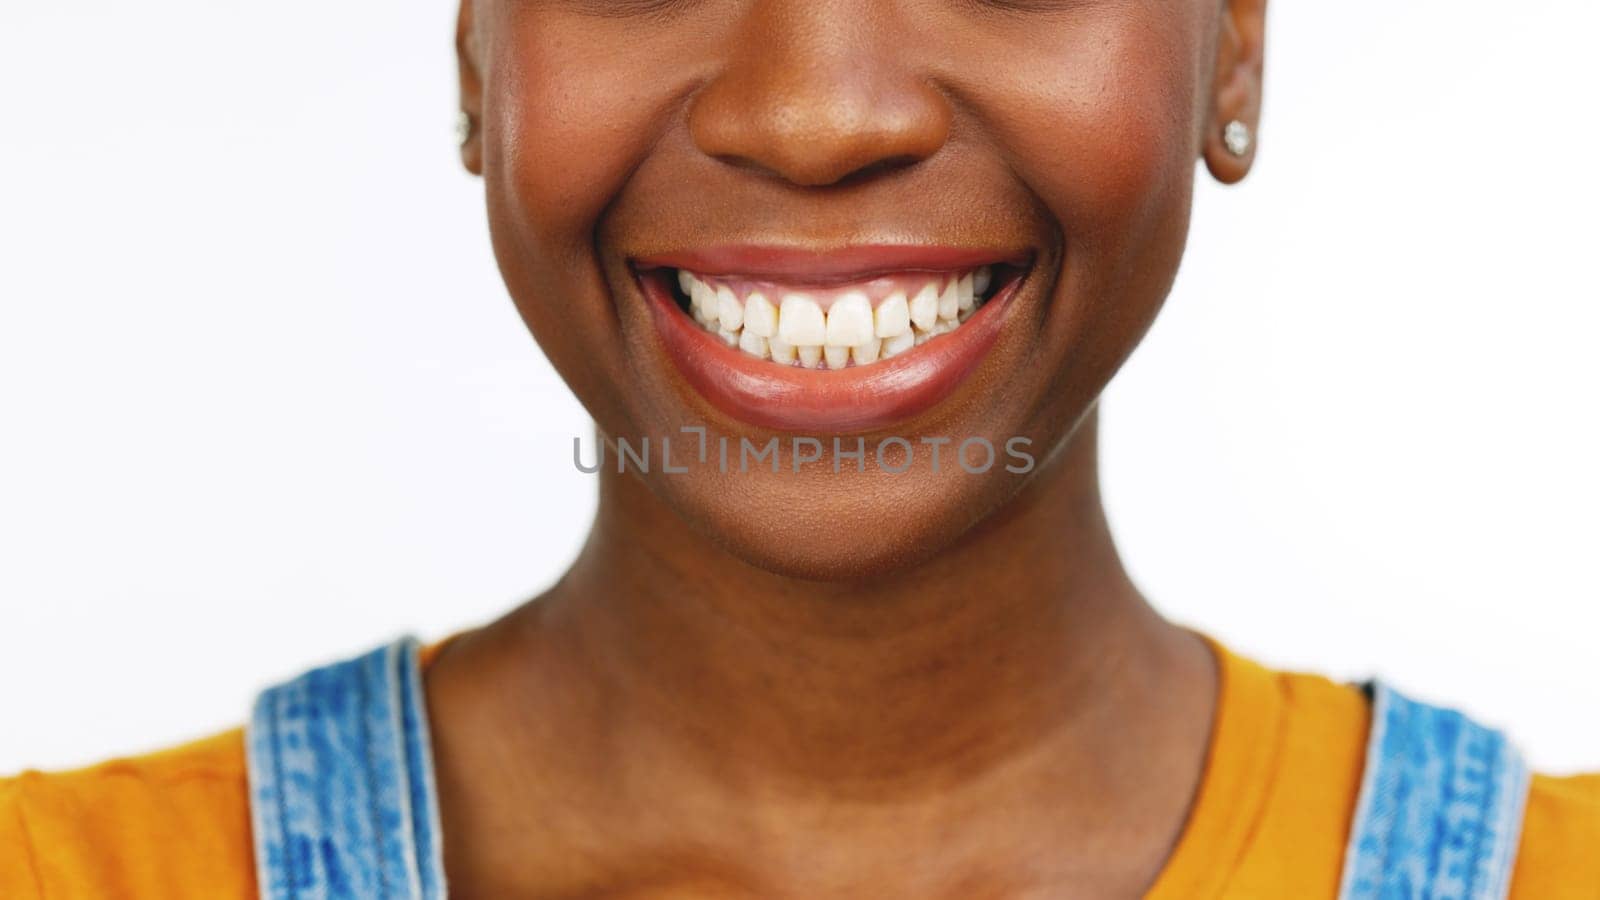 Black woman, teeth and smile for dental care, whitening or healthcare against a white studio background. Happy isolated African American female smiling for tooth, mouth or gum and oral hygiene.